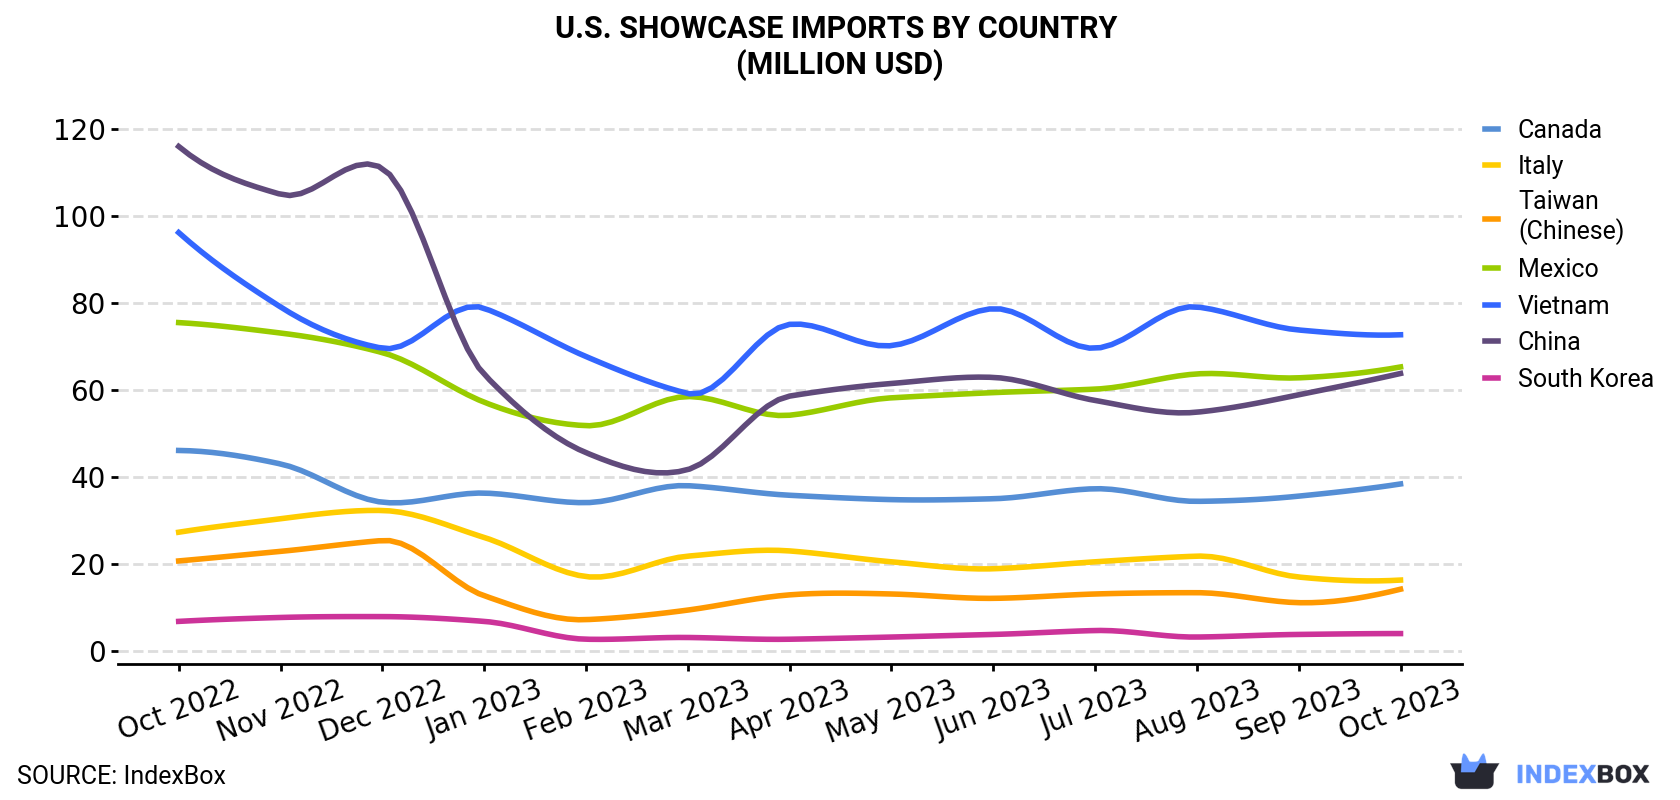 U.S. Showcase Imports By Country (Million USD)